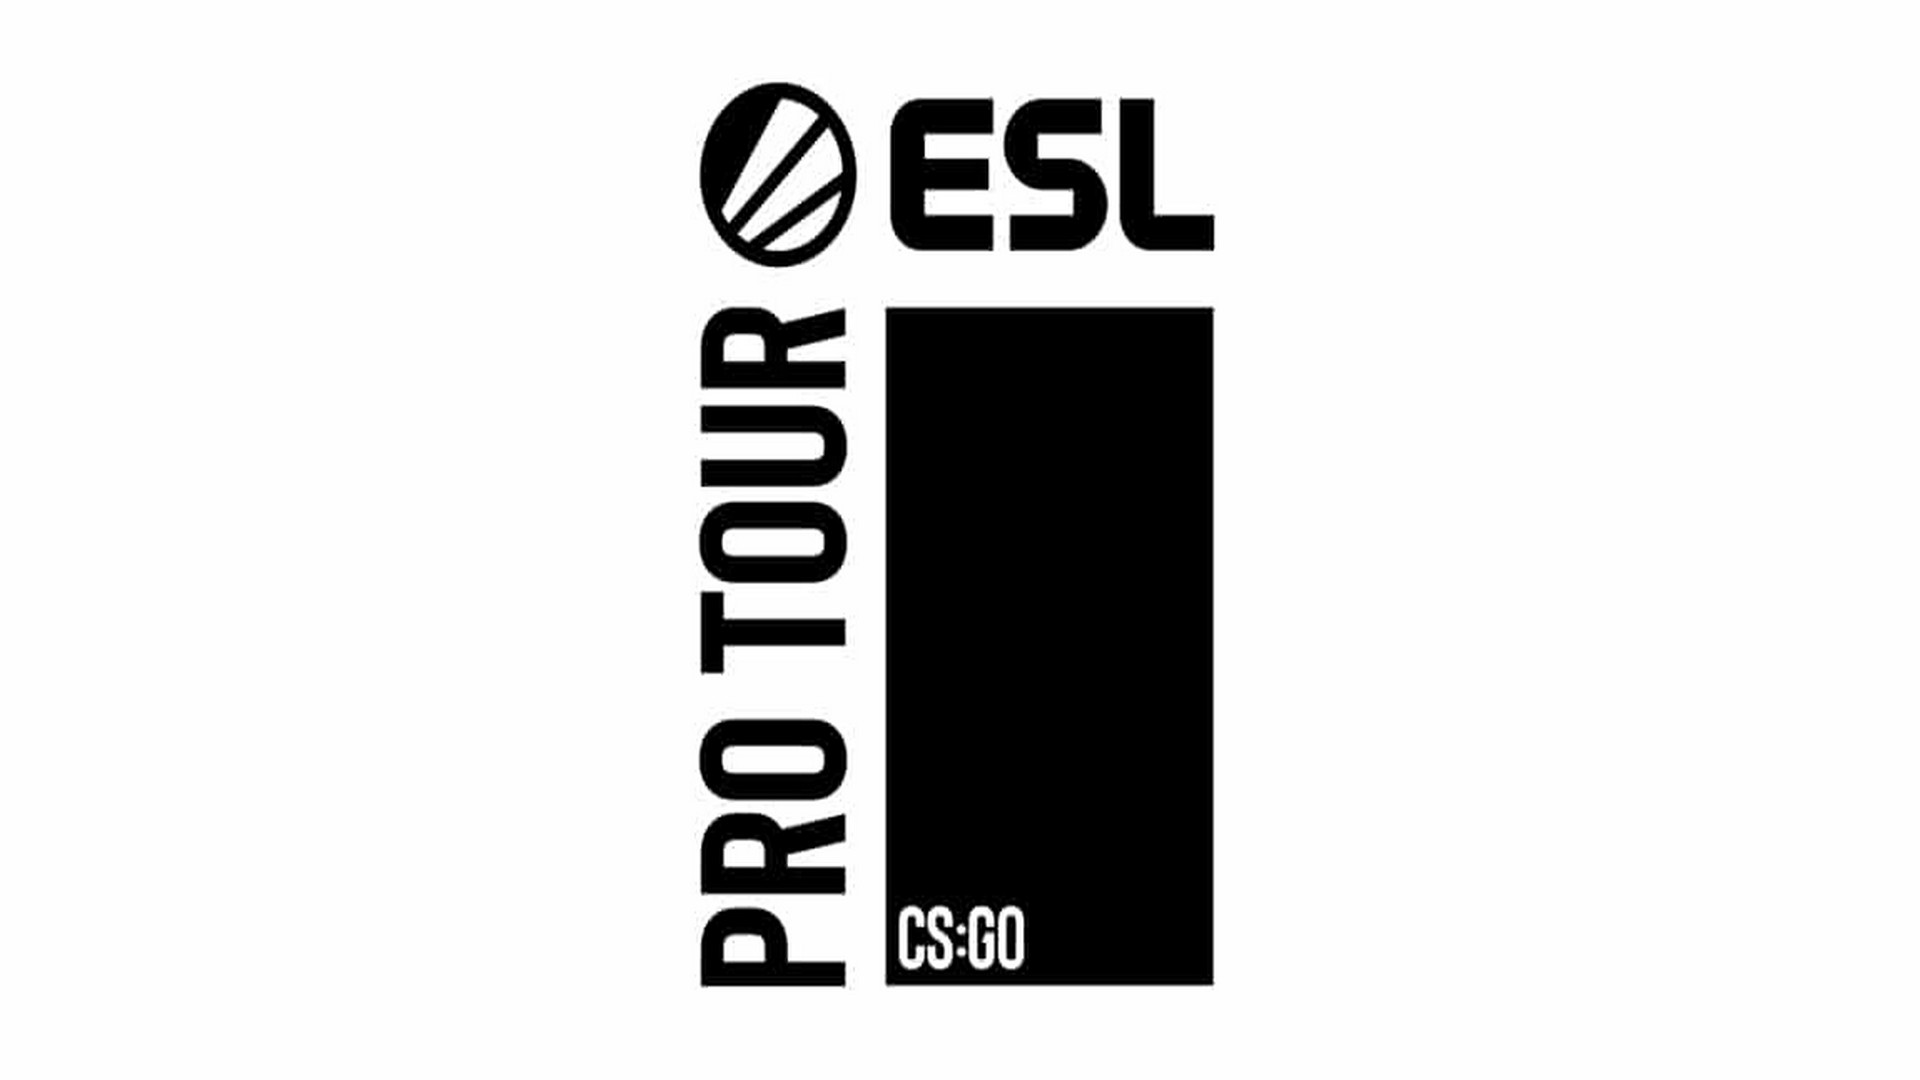 ESL Pro Tour CSGO Changes and Calendar For 2022 Revealed Highlighting Plans To Welcome Back Fans At Live Tournaments MKAU Gaming